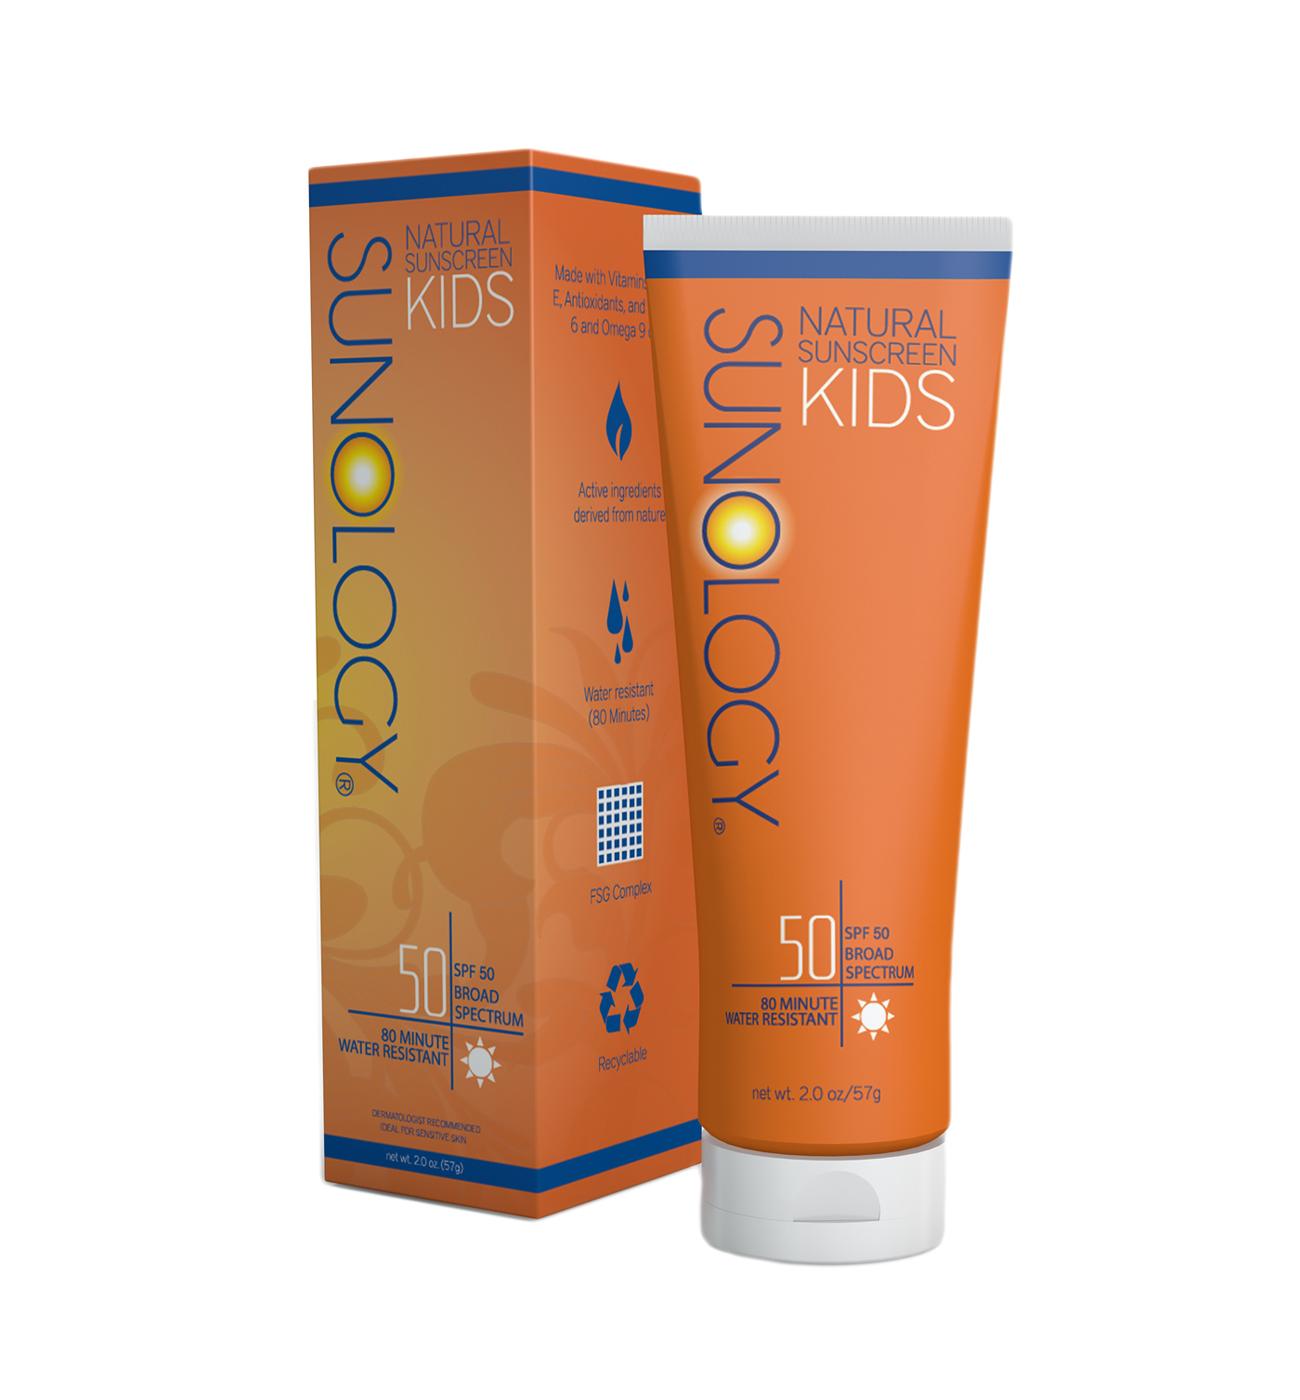 Sunology Natural Sunscreen Kids SPF 50 Lotion; image 1 of 2